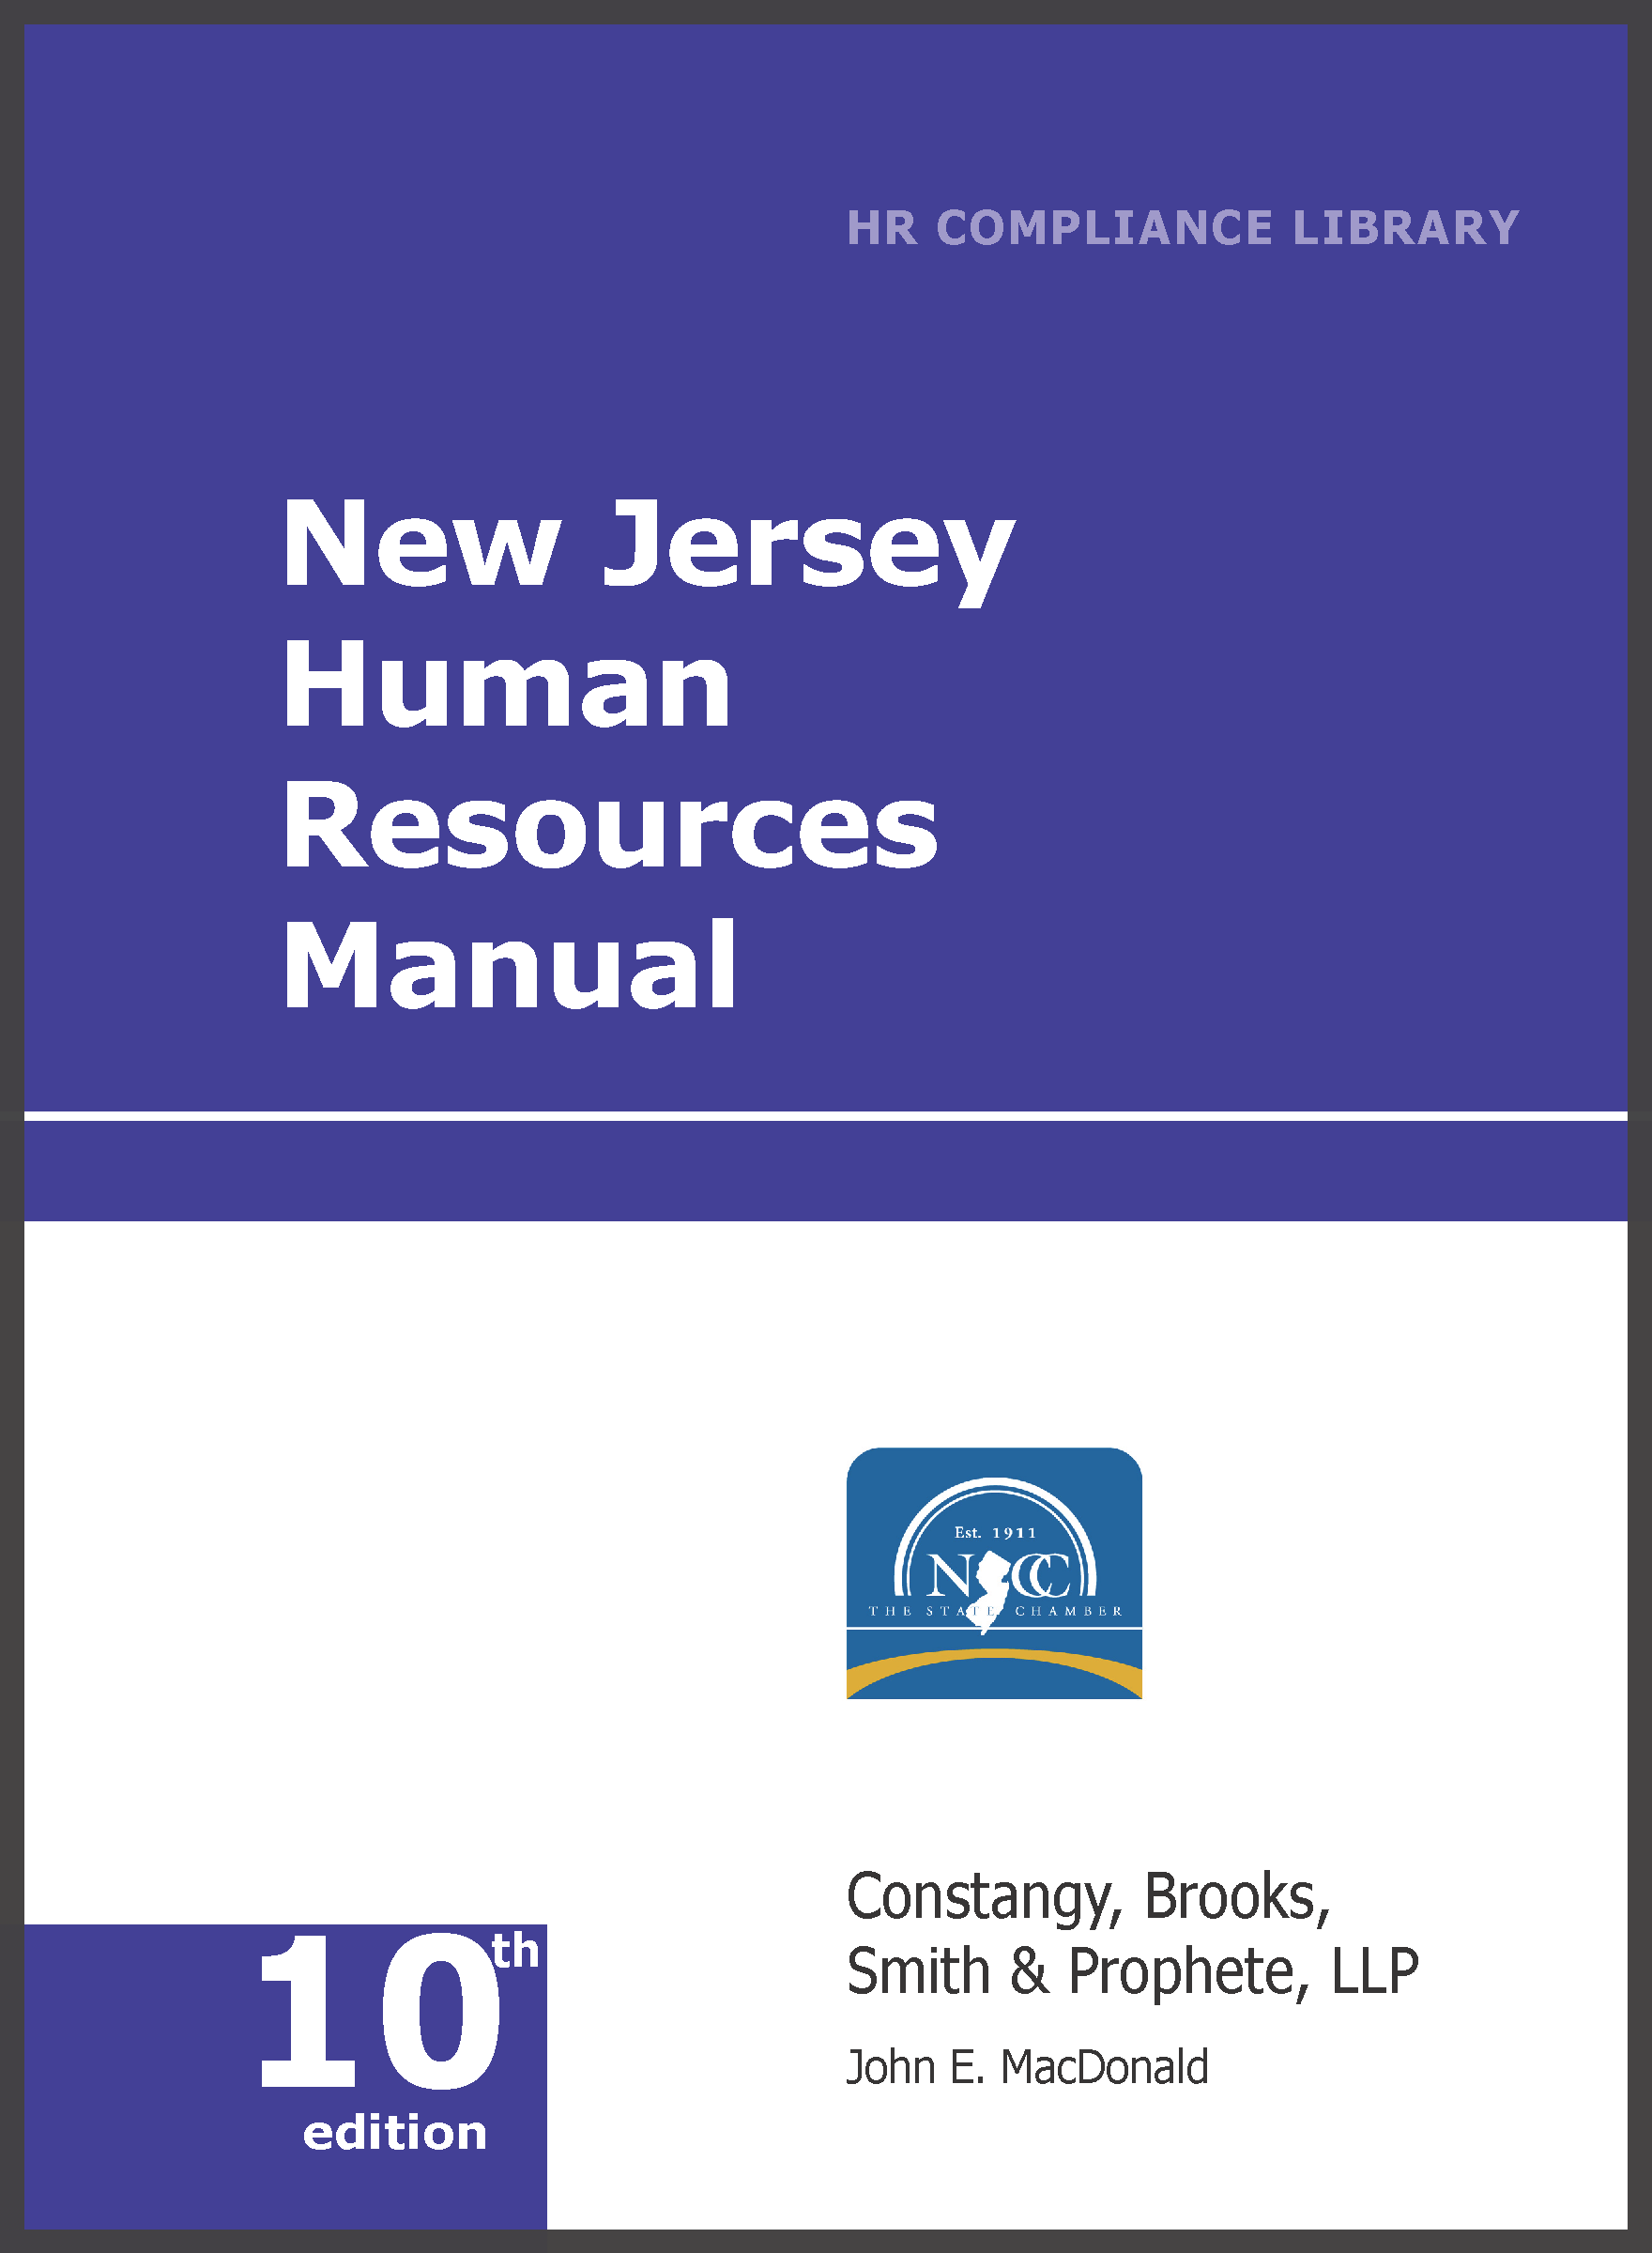 New Jersey Human Resources Library—Online Only      employment law image, remote work, labor laws, employment laws, right to work, order of protection, minimum wage